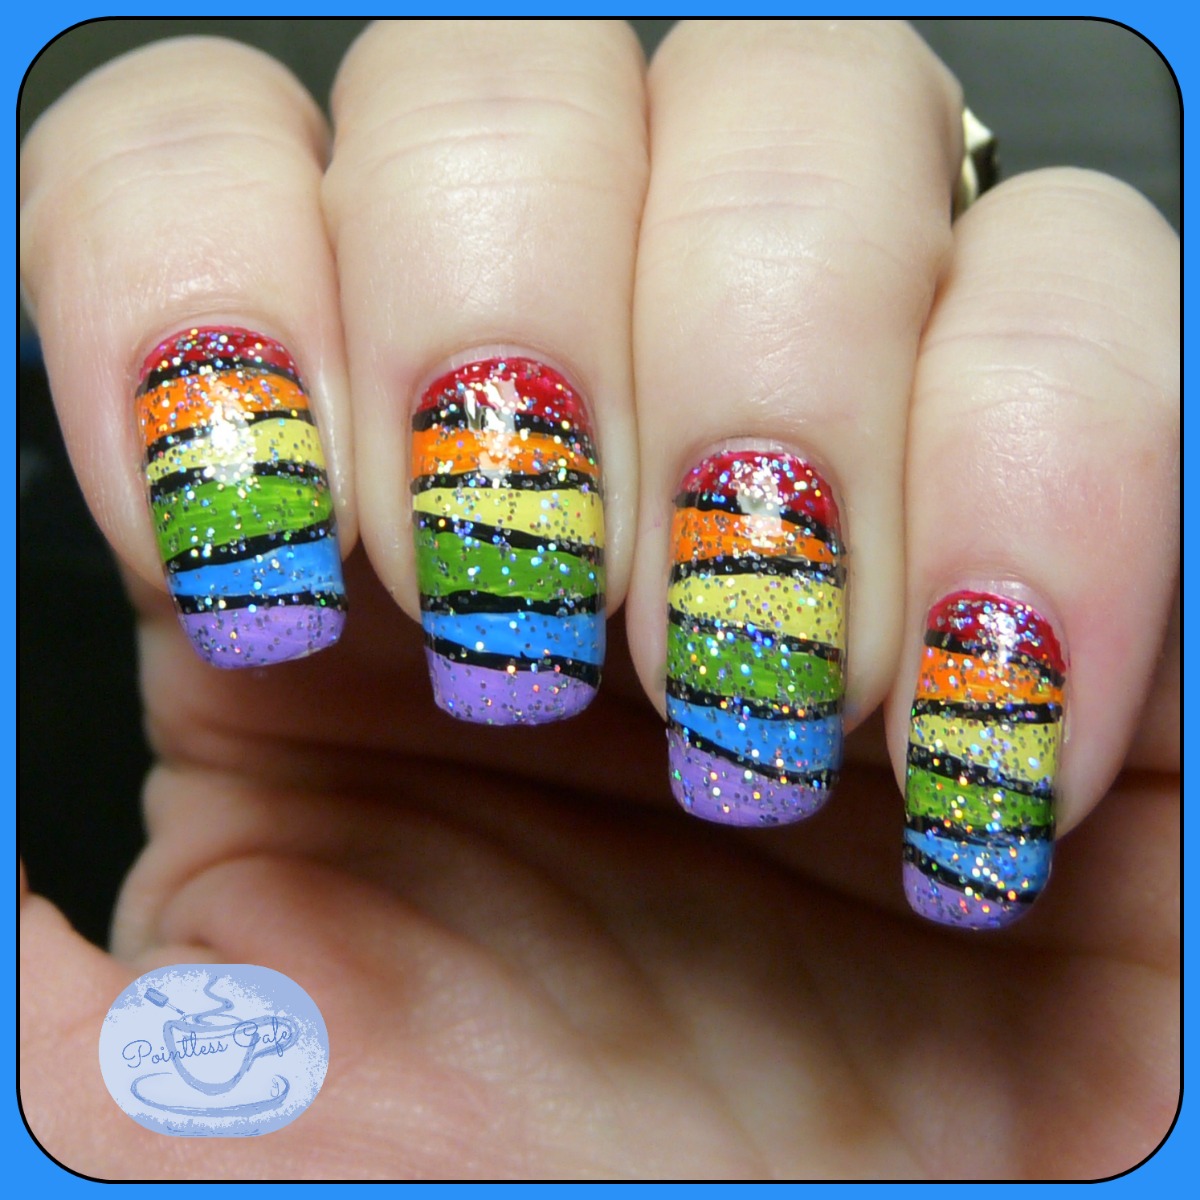 13 Days of January Nail Art Challenge: Rainbow Nails! | Pointless Cafe